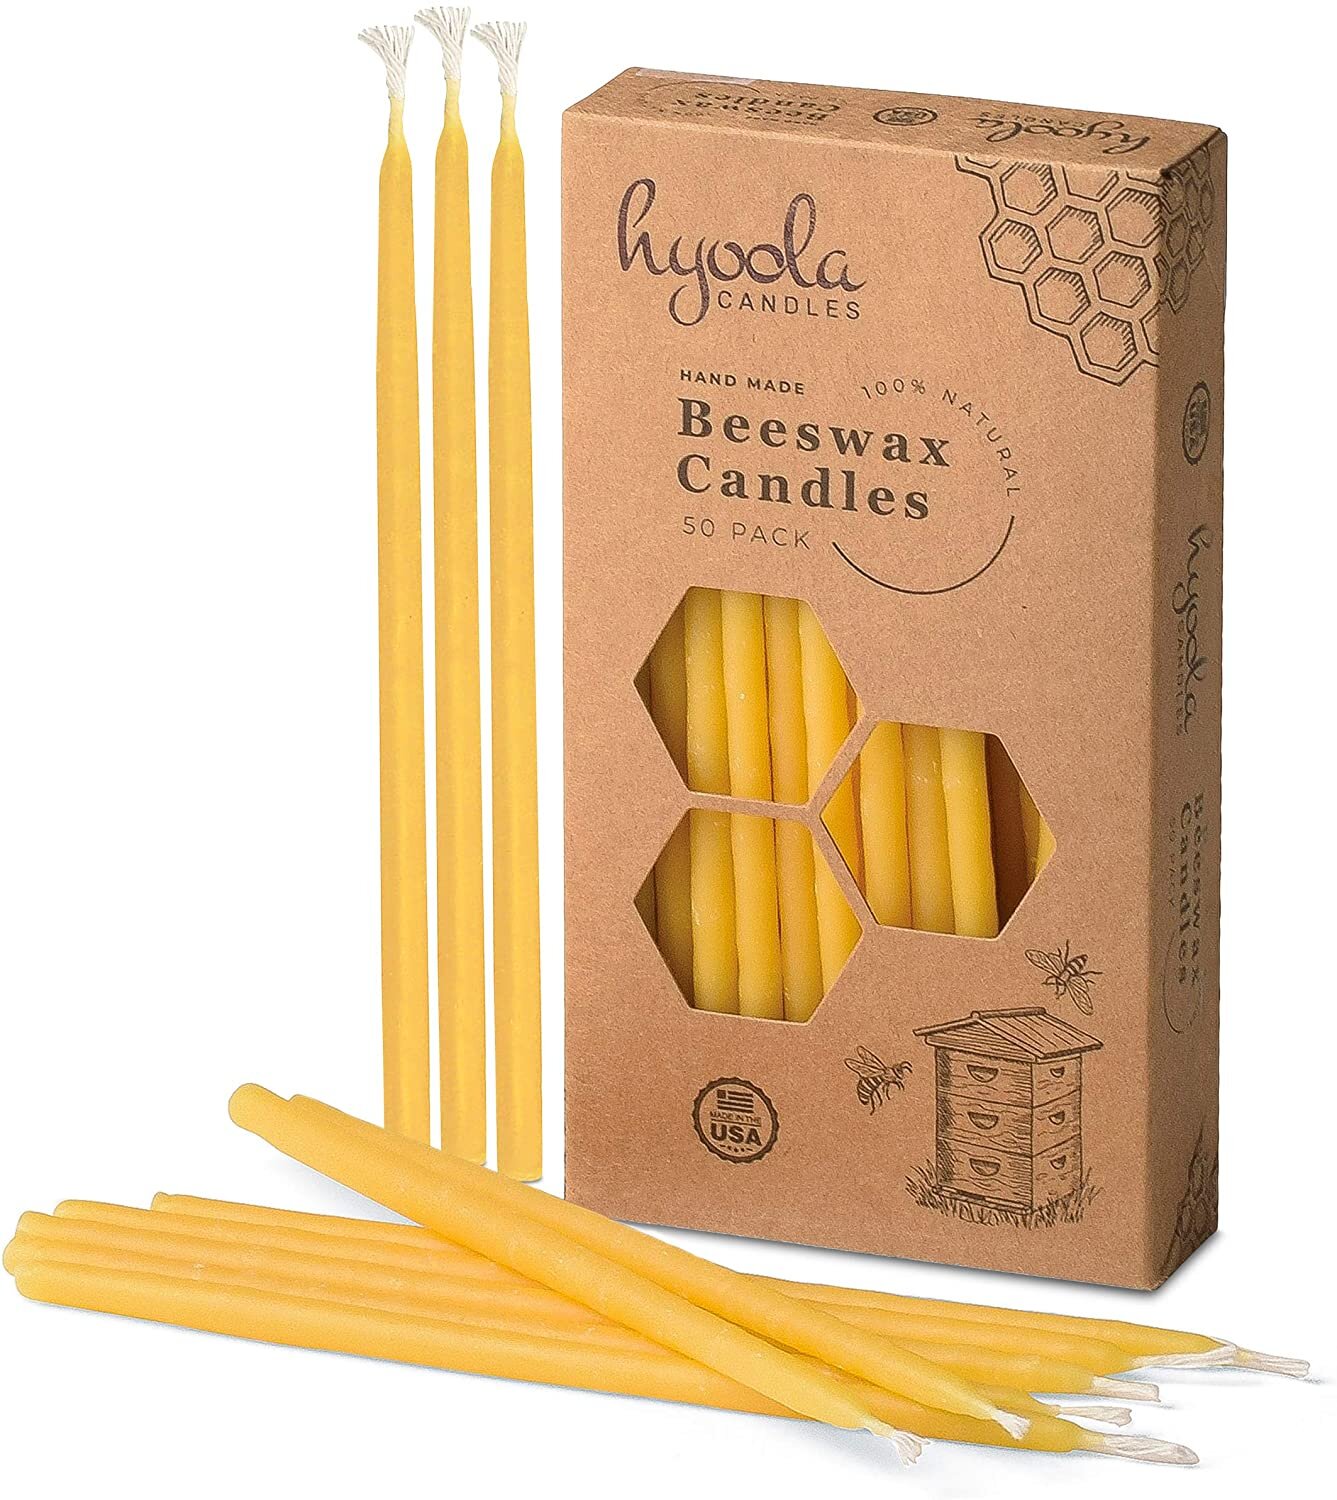 Beeswax Bday Candles